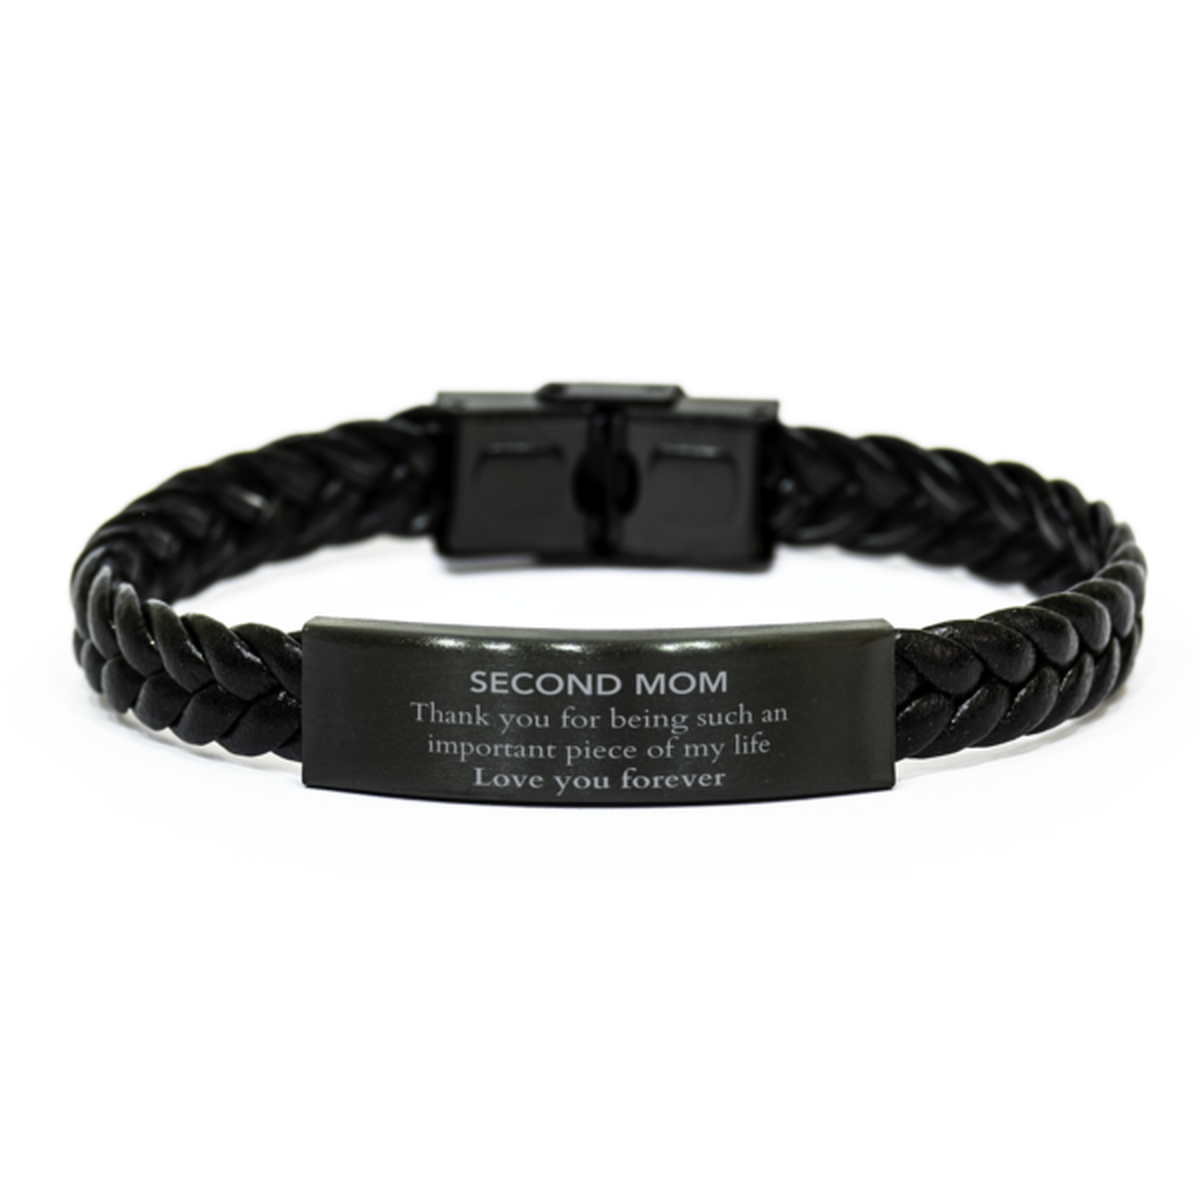 Appropriate Second Mom Braided Leather Bracelet Epic Birthday Gifts for Second Mom Thank you for being such an important piece of my life Second Mom Christmas Mothers Fathers Day